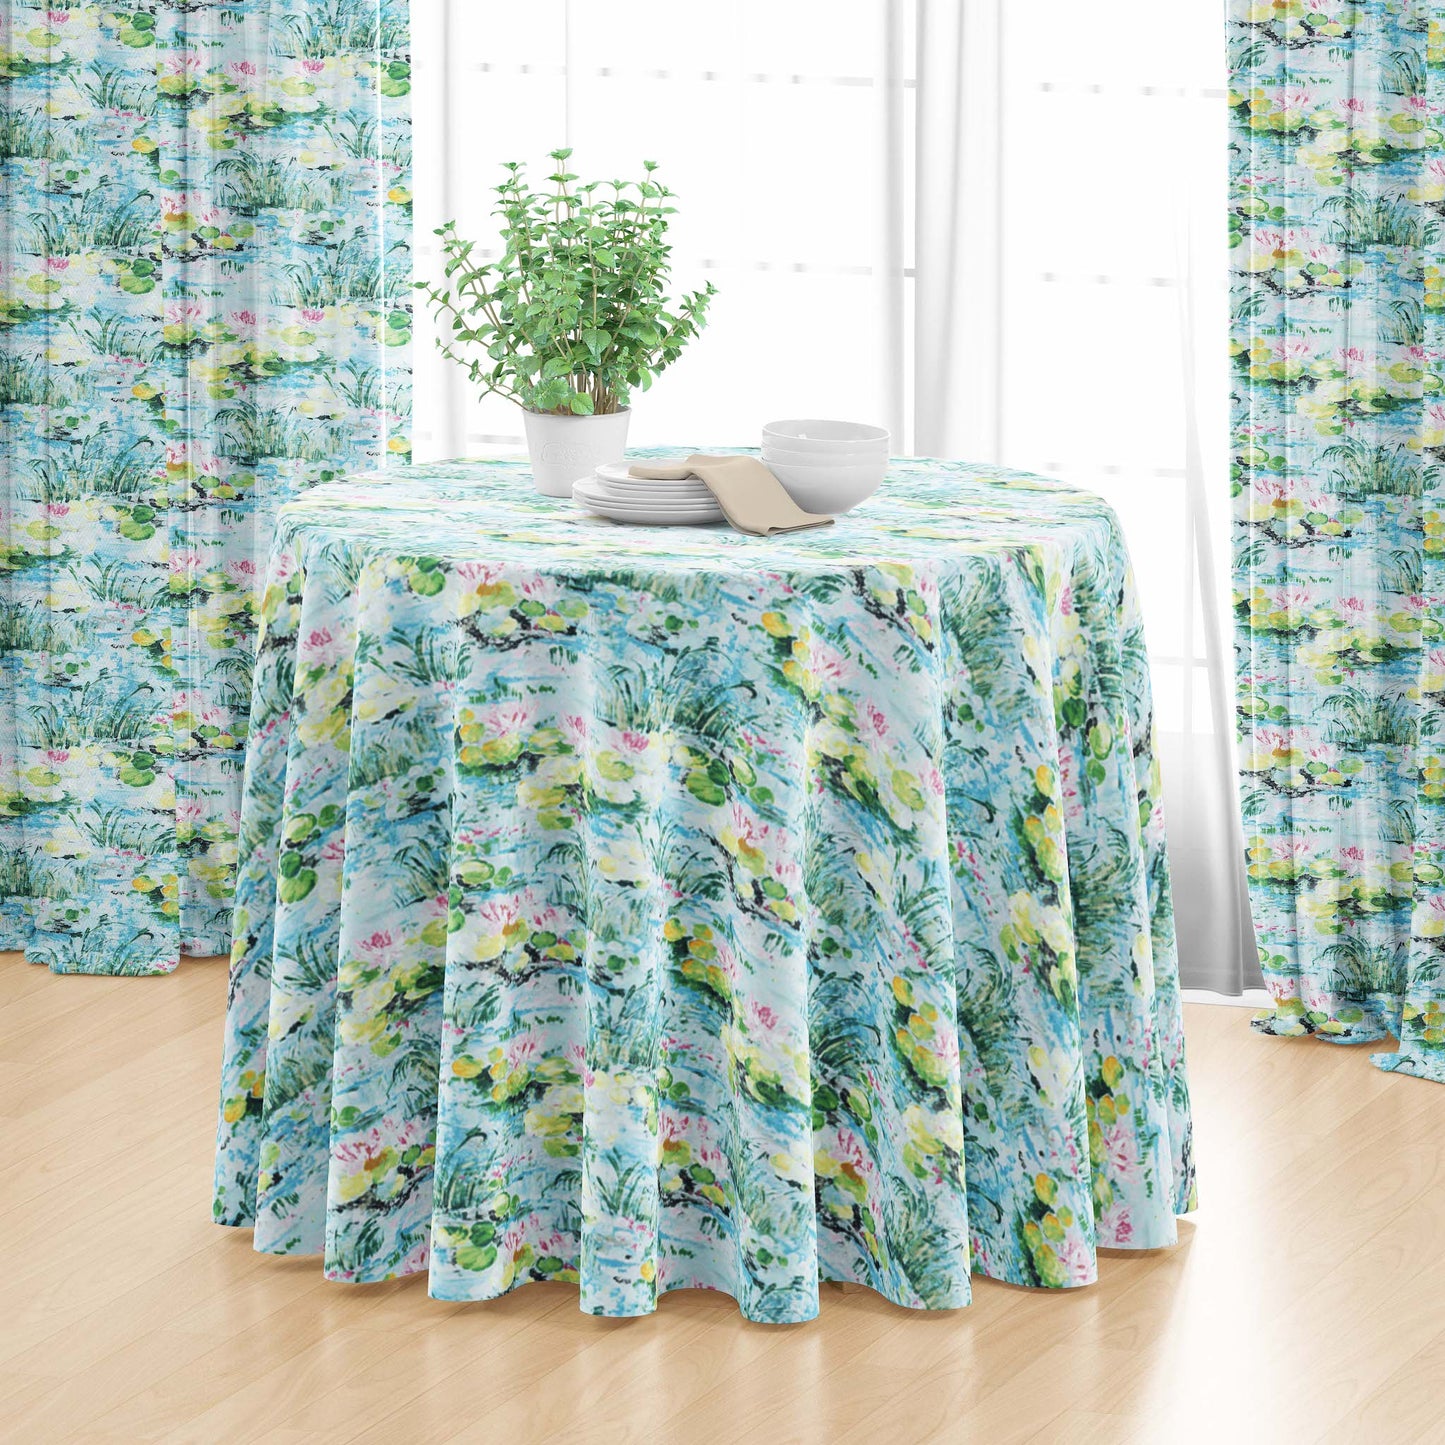 Round Tablecloth in Monet Dream Blue Water Lilies